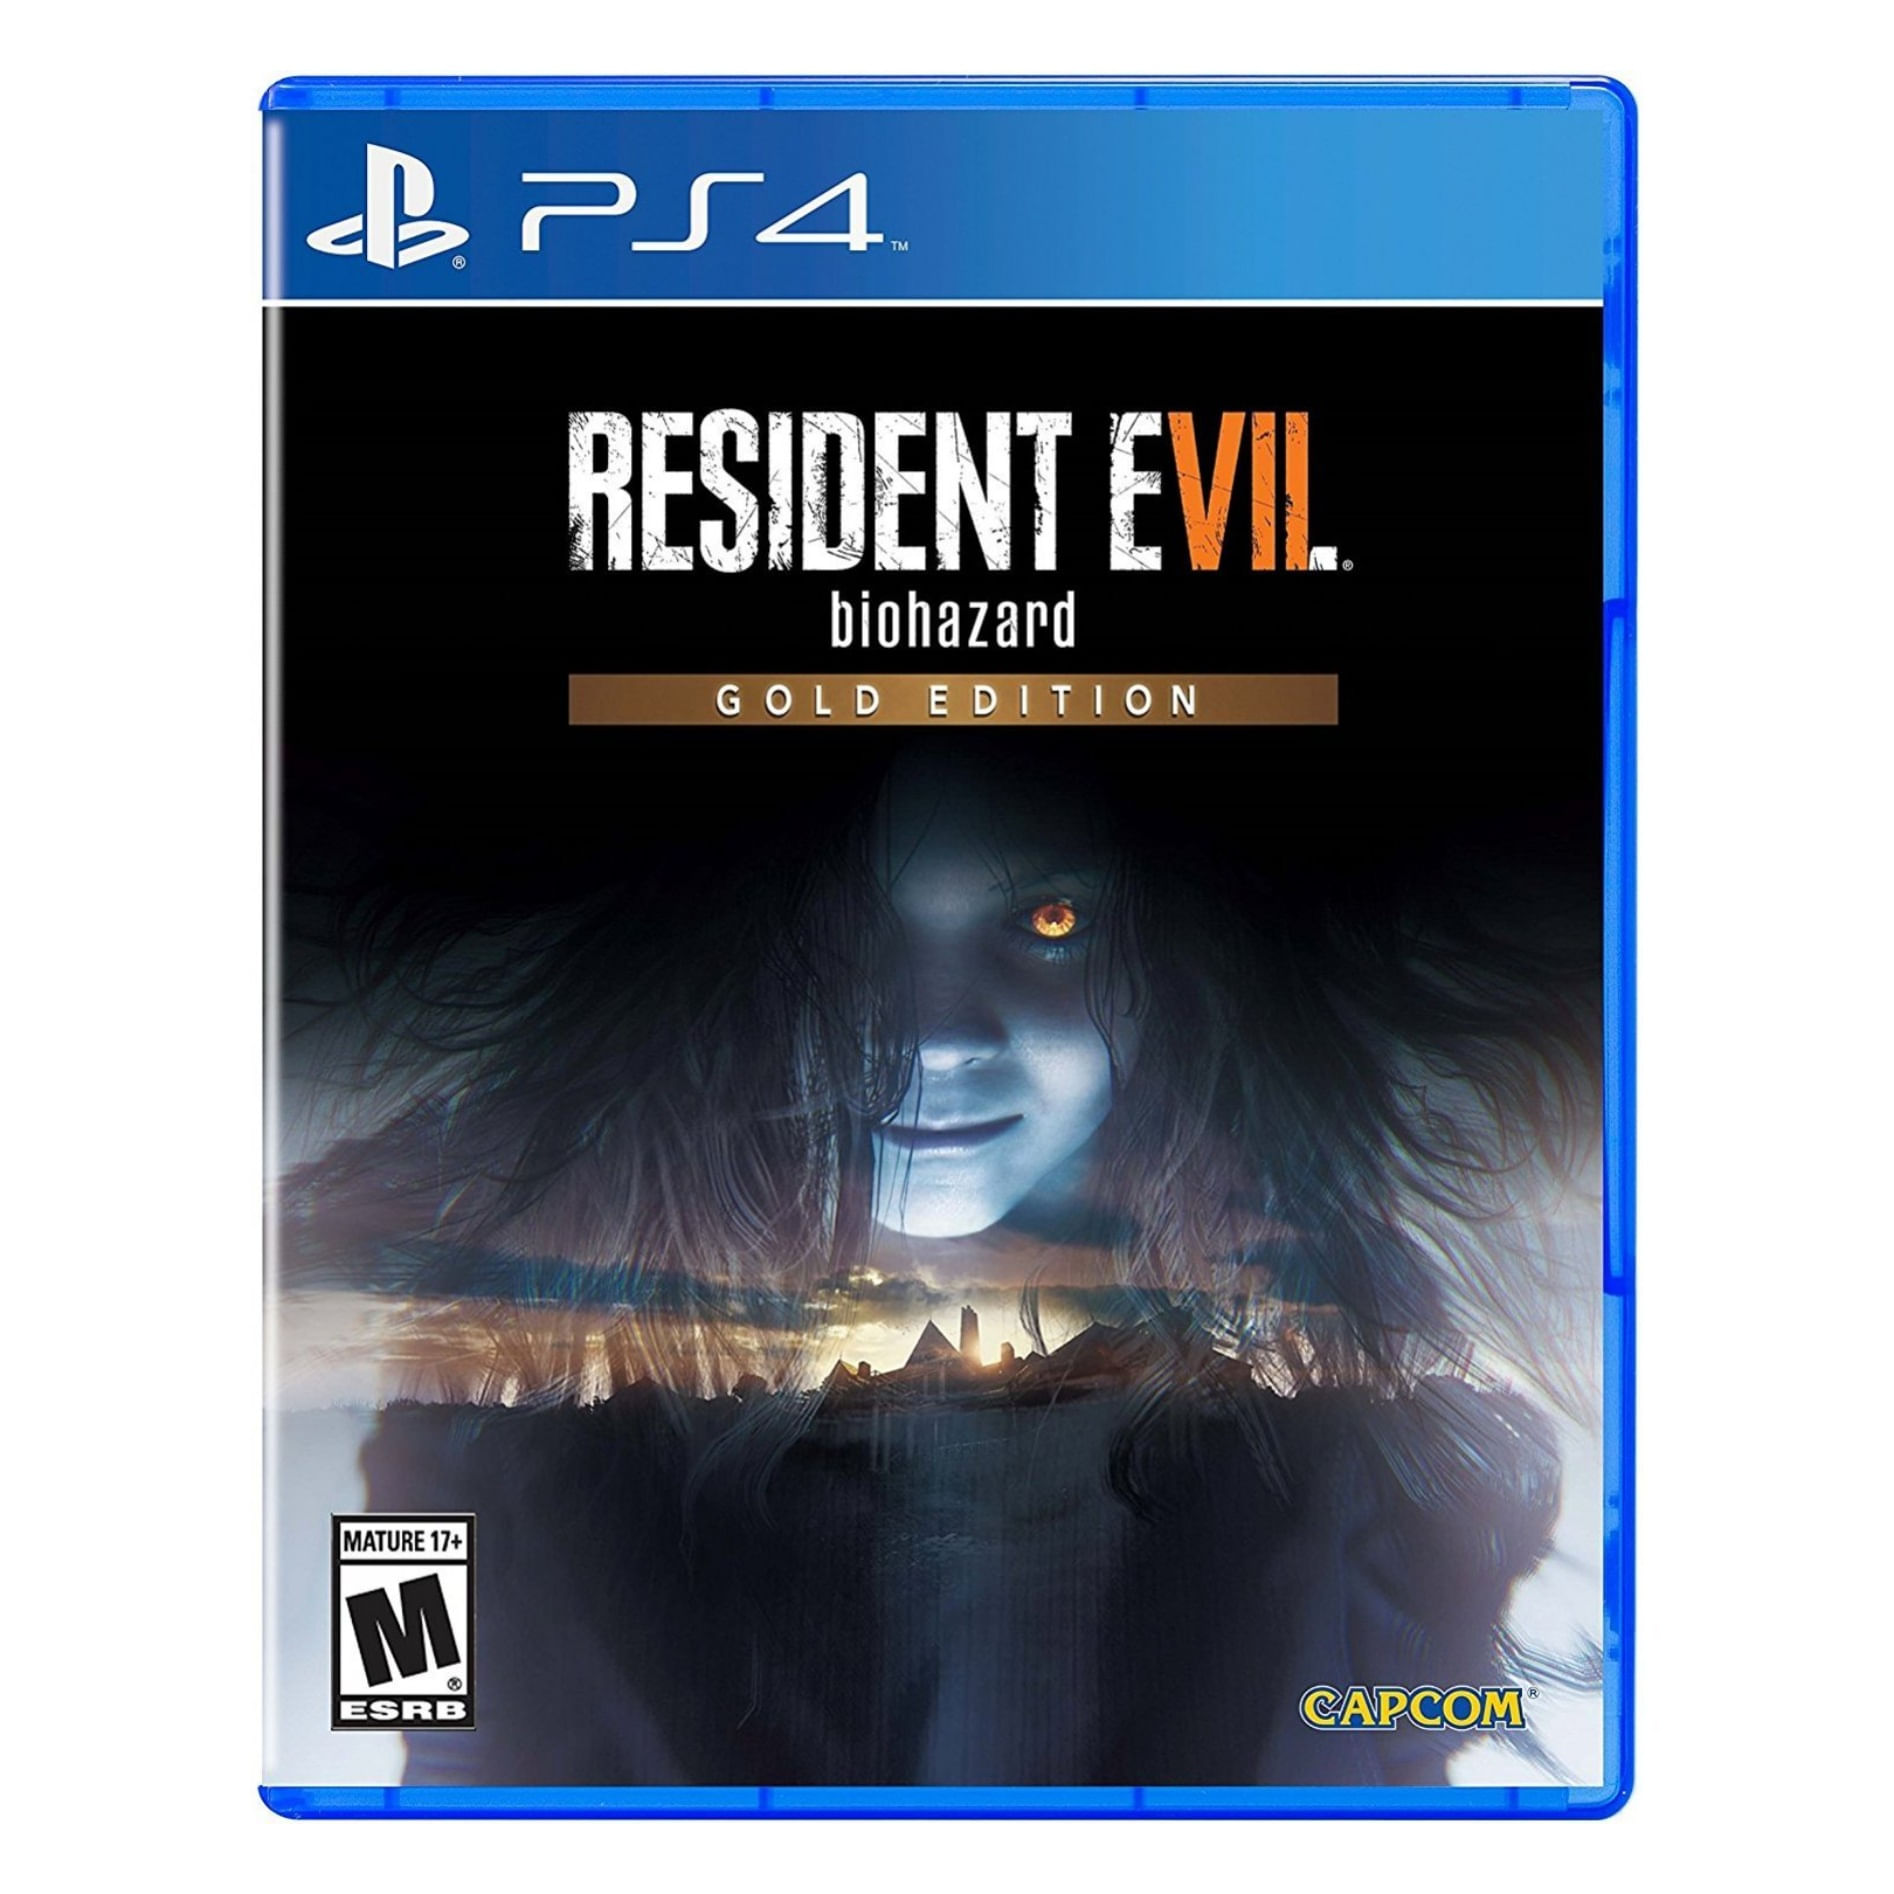 Juego Ps4 Resident Evil 7 Biohazard Gold Edition